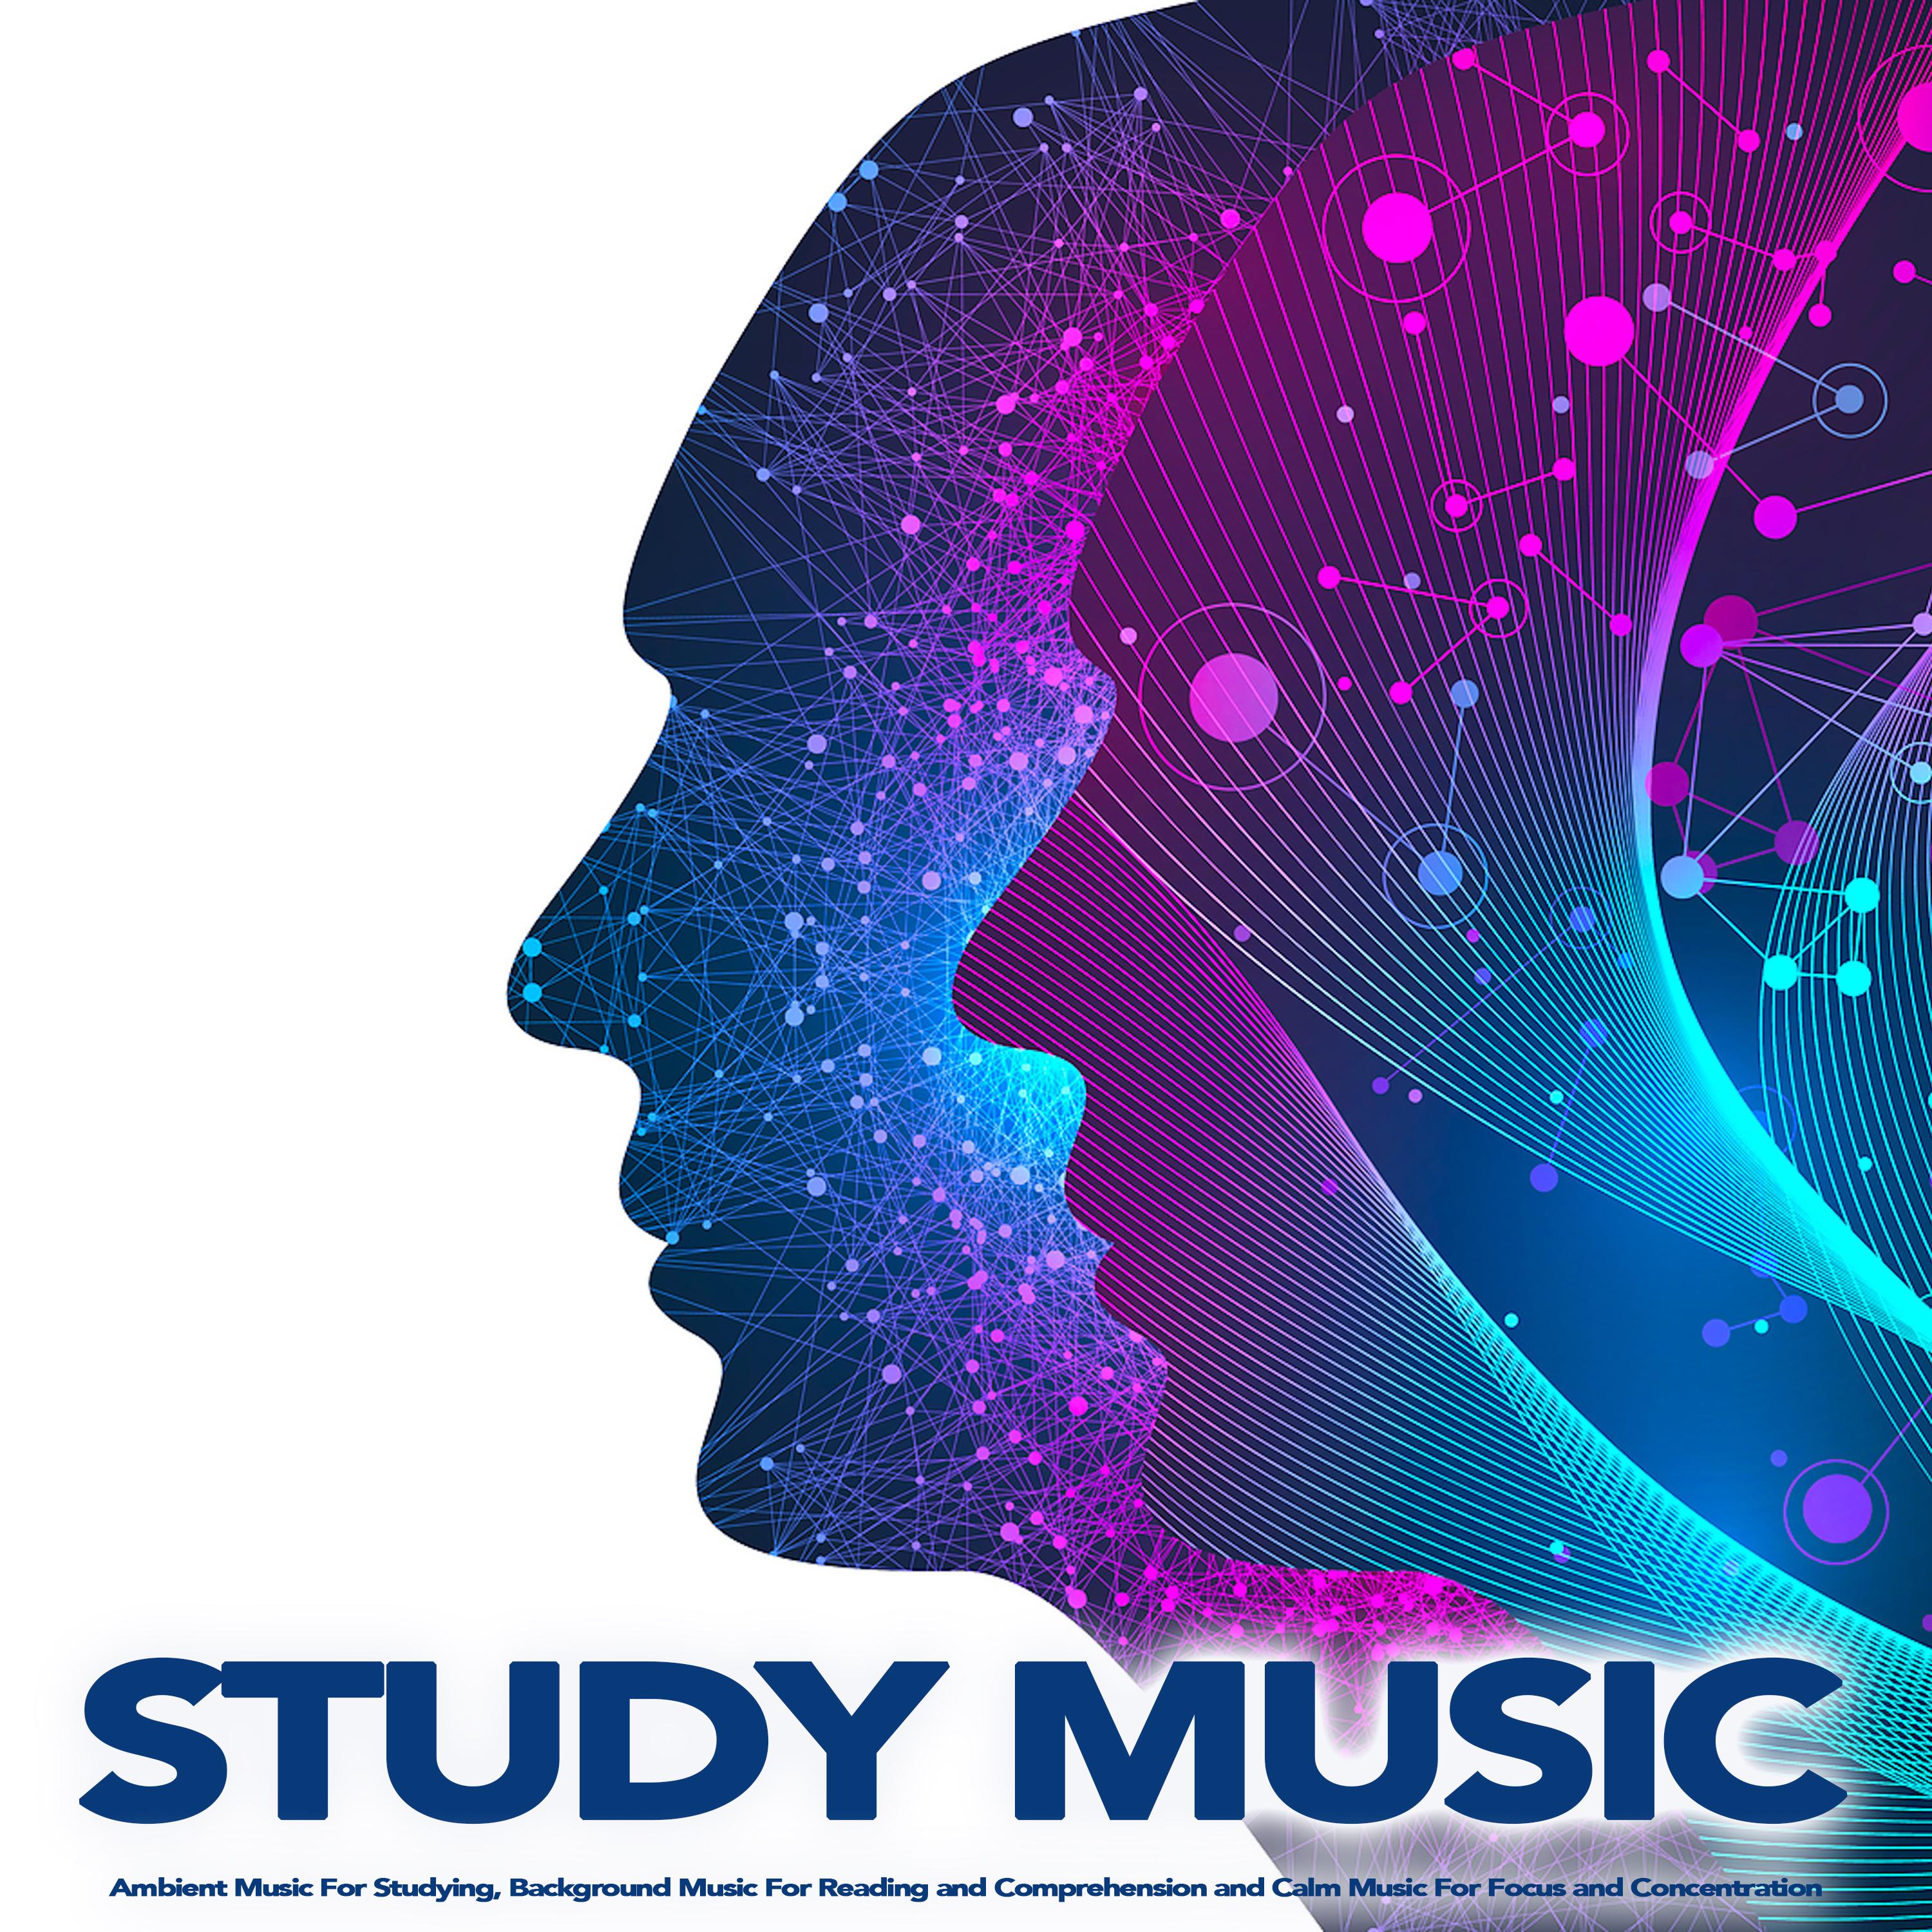 Study Music: Ambient Music For Studying, Background Music For Reading and Comprehension and Calm Music For Focus and Concentration